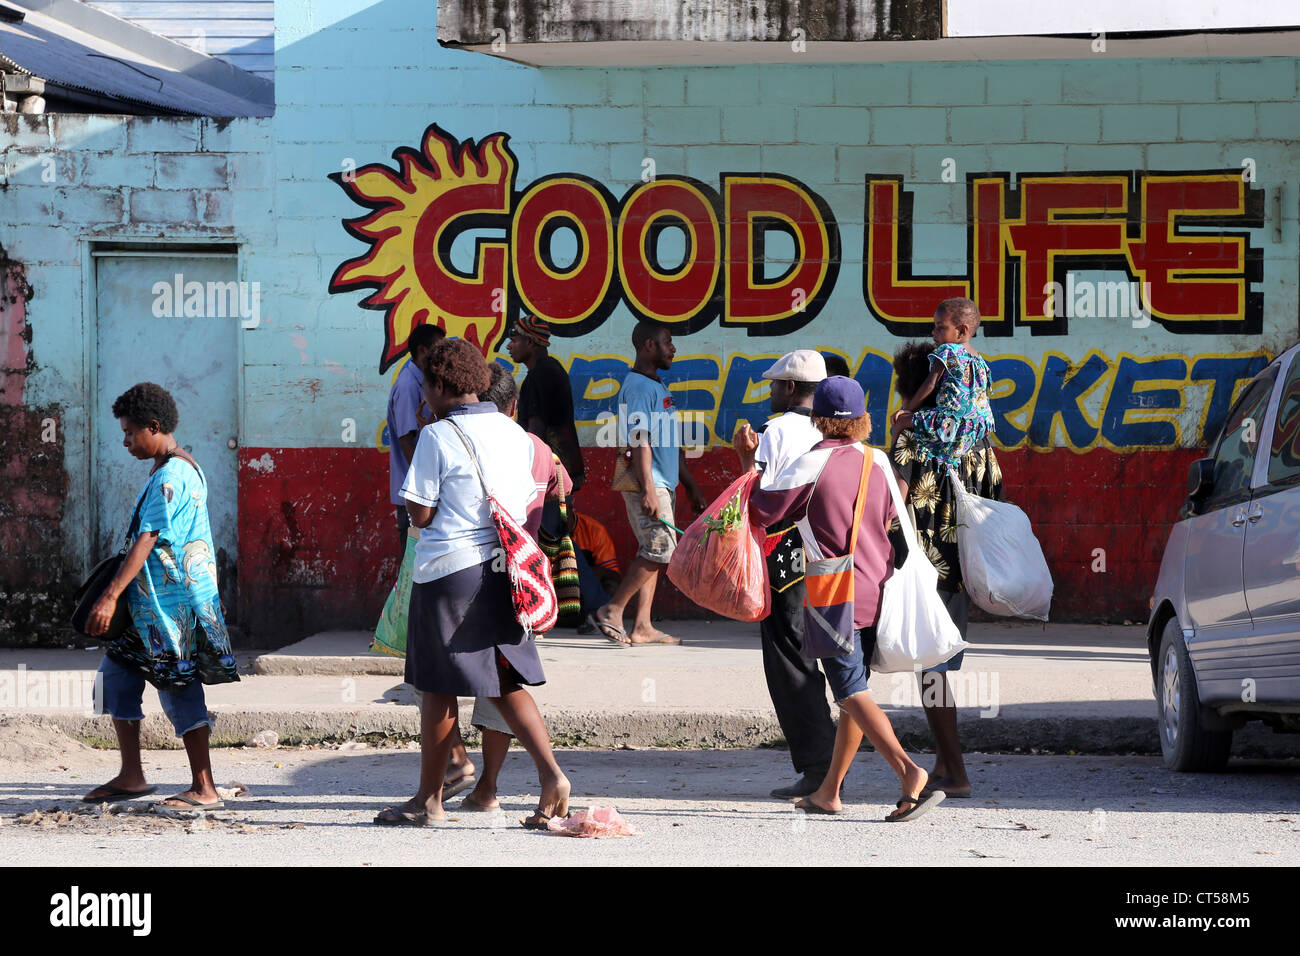 Entrance to a supermarket with the name GOOD LIFE in Madang, Papua New Guinea Stock Photo